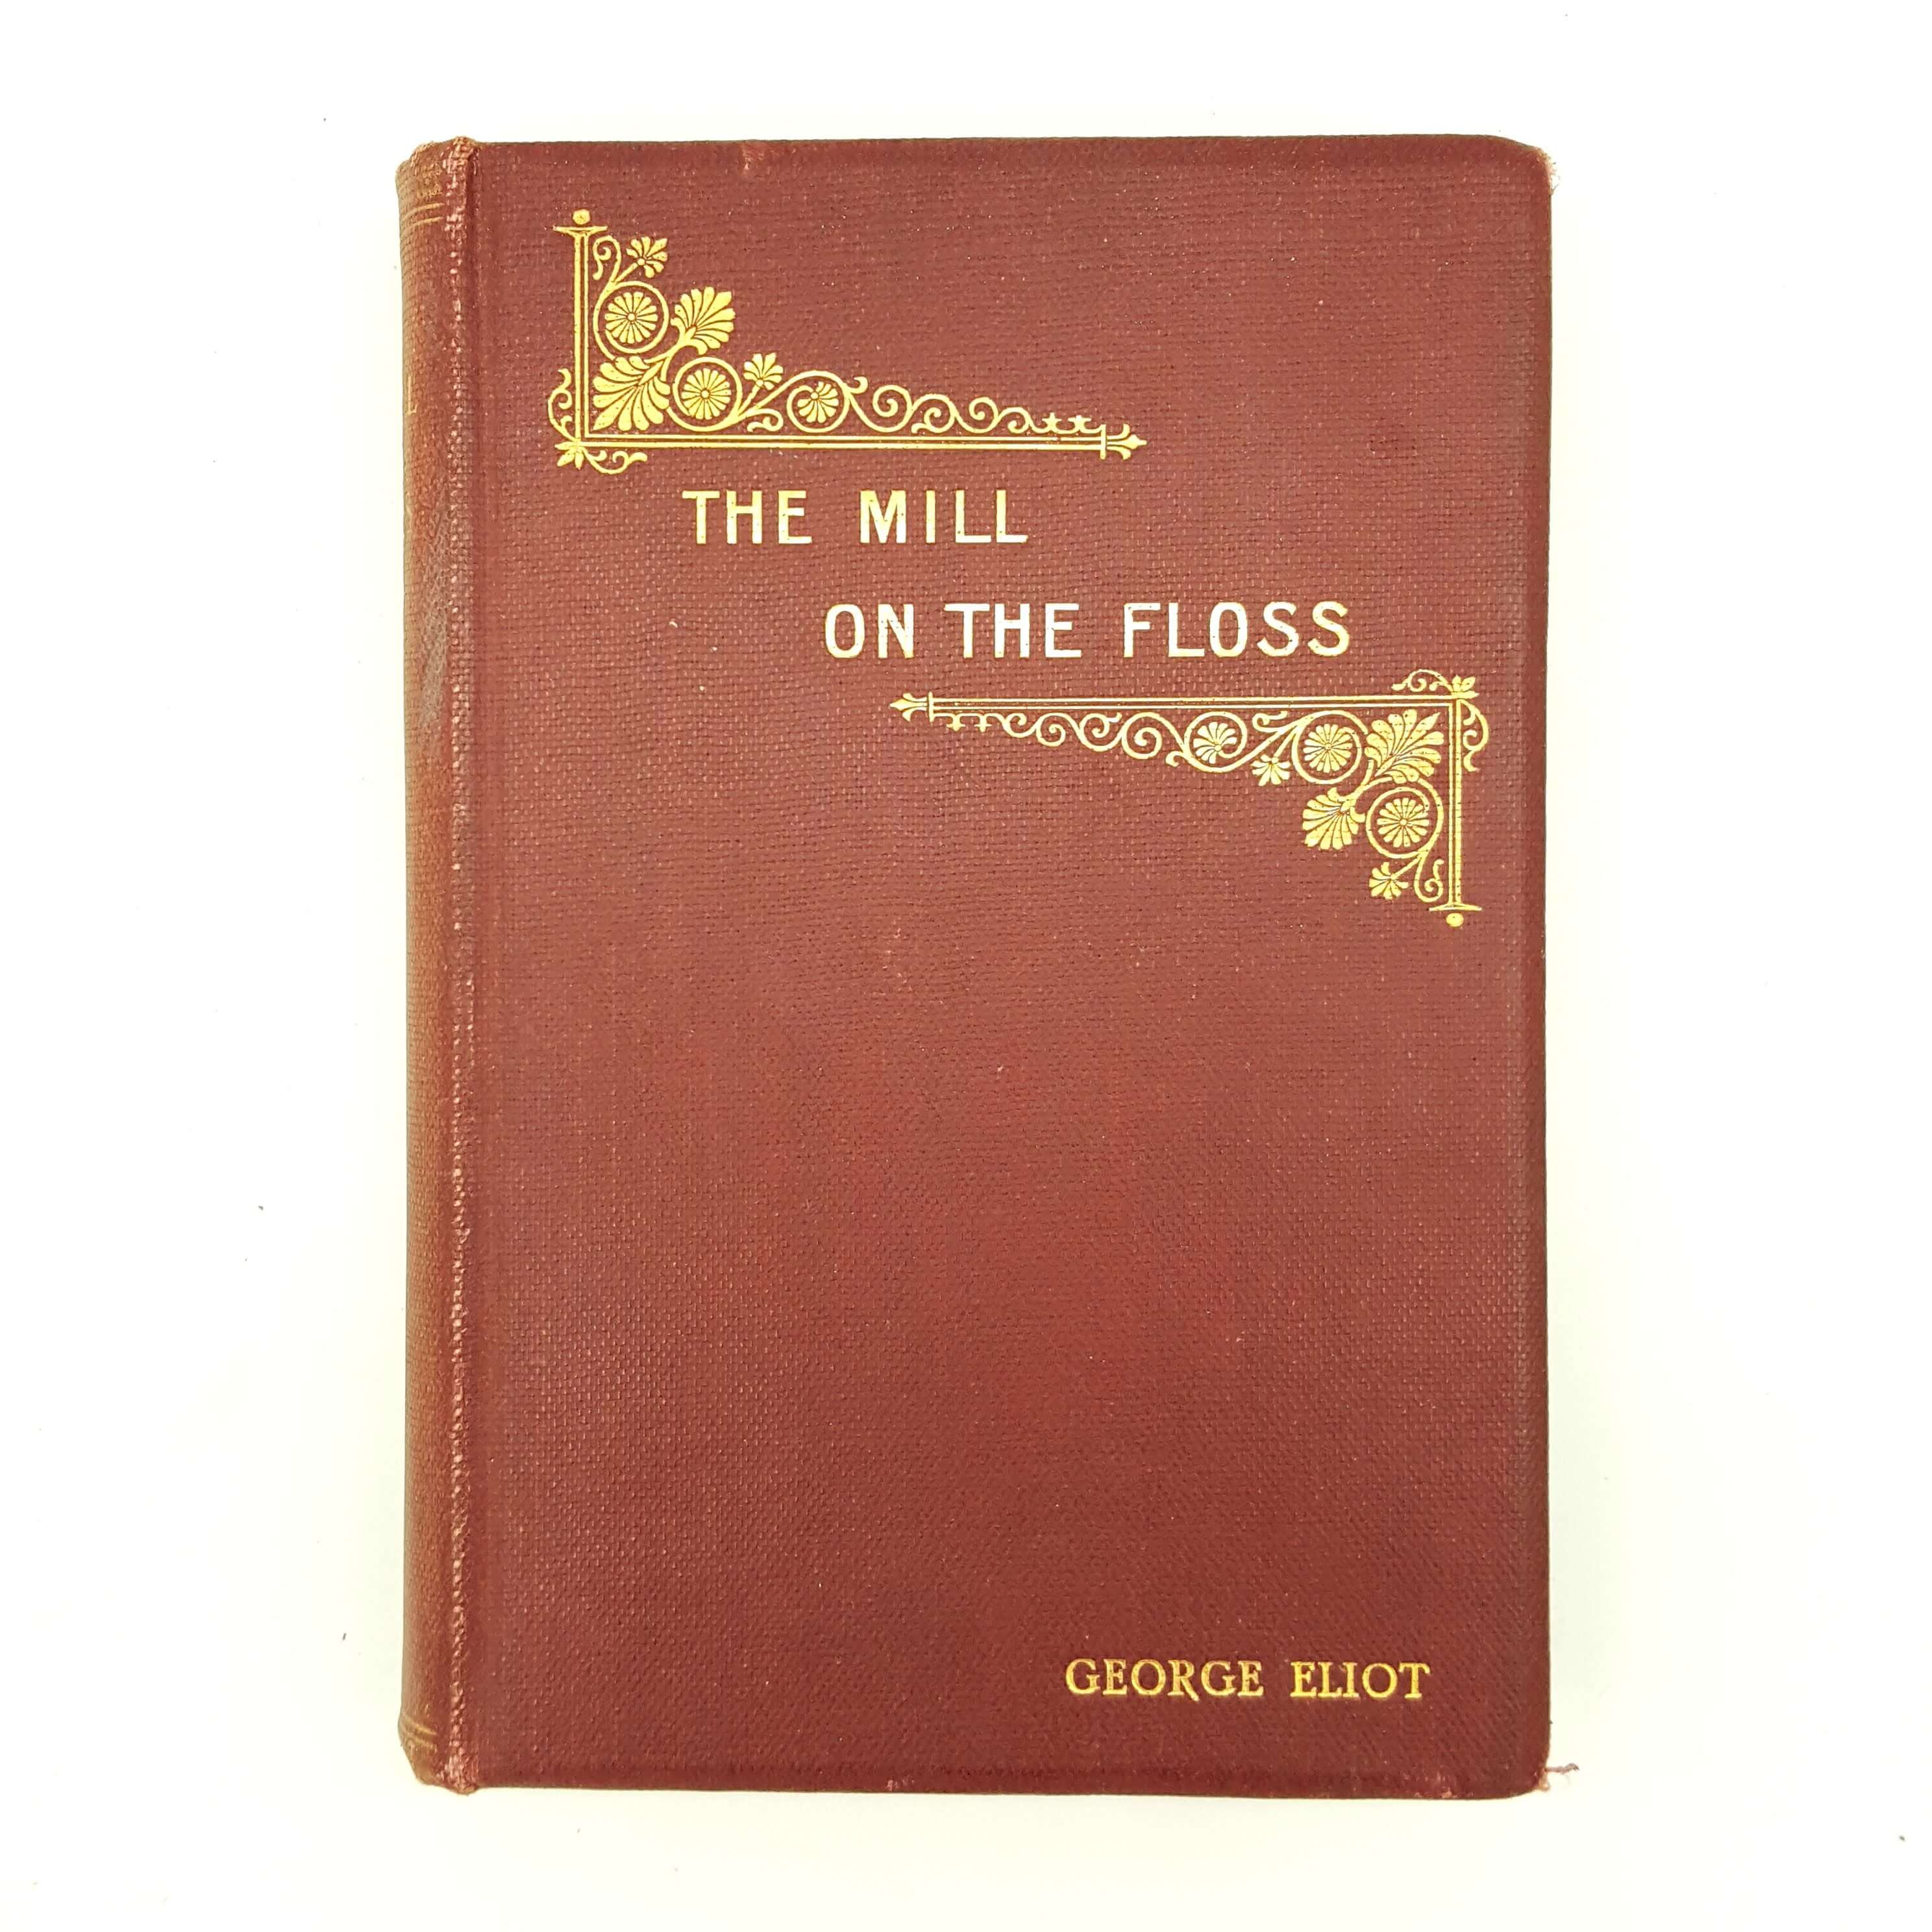 GEORGE ELIOT’S MILL ON THE FLOSS - JAMES ASKEW & SON